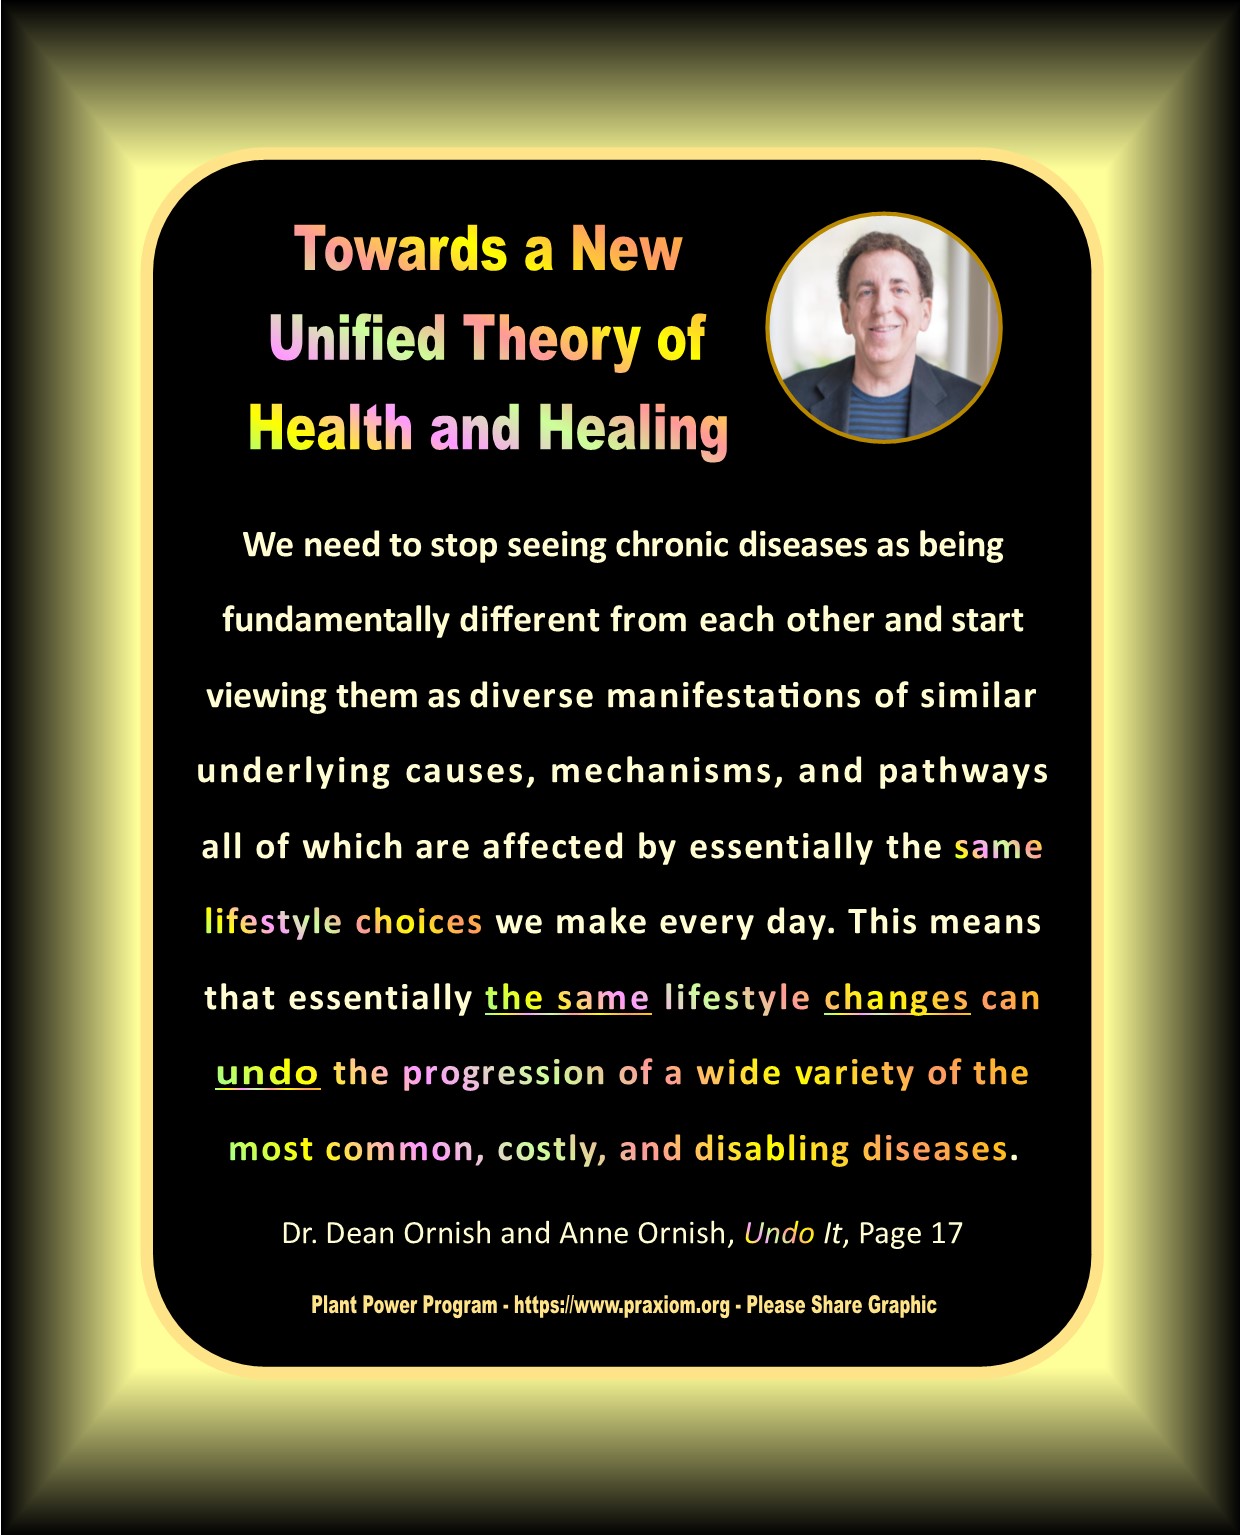 Towards a New Unified Theory of Disease - Dr. Dean Ornish